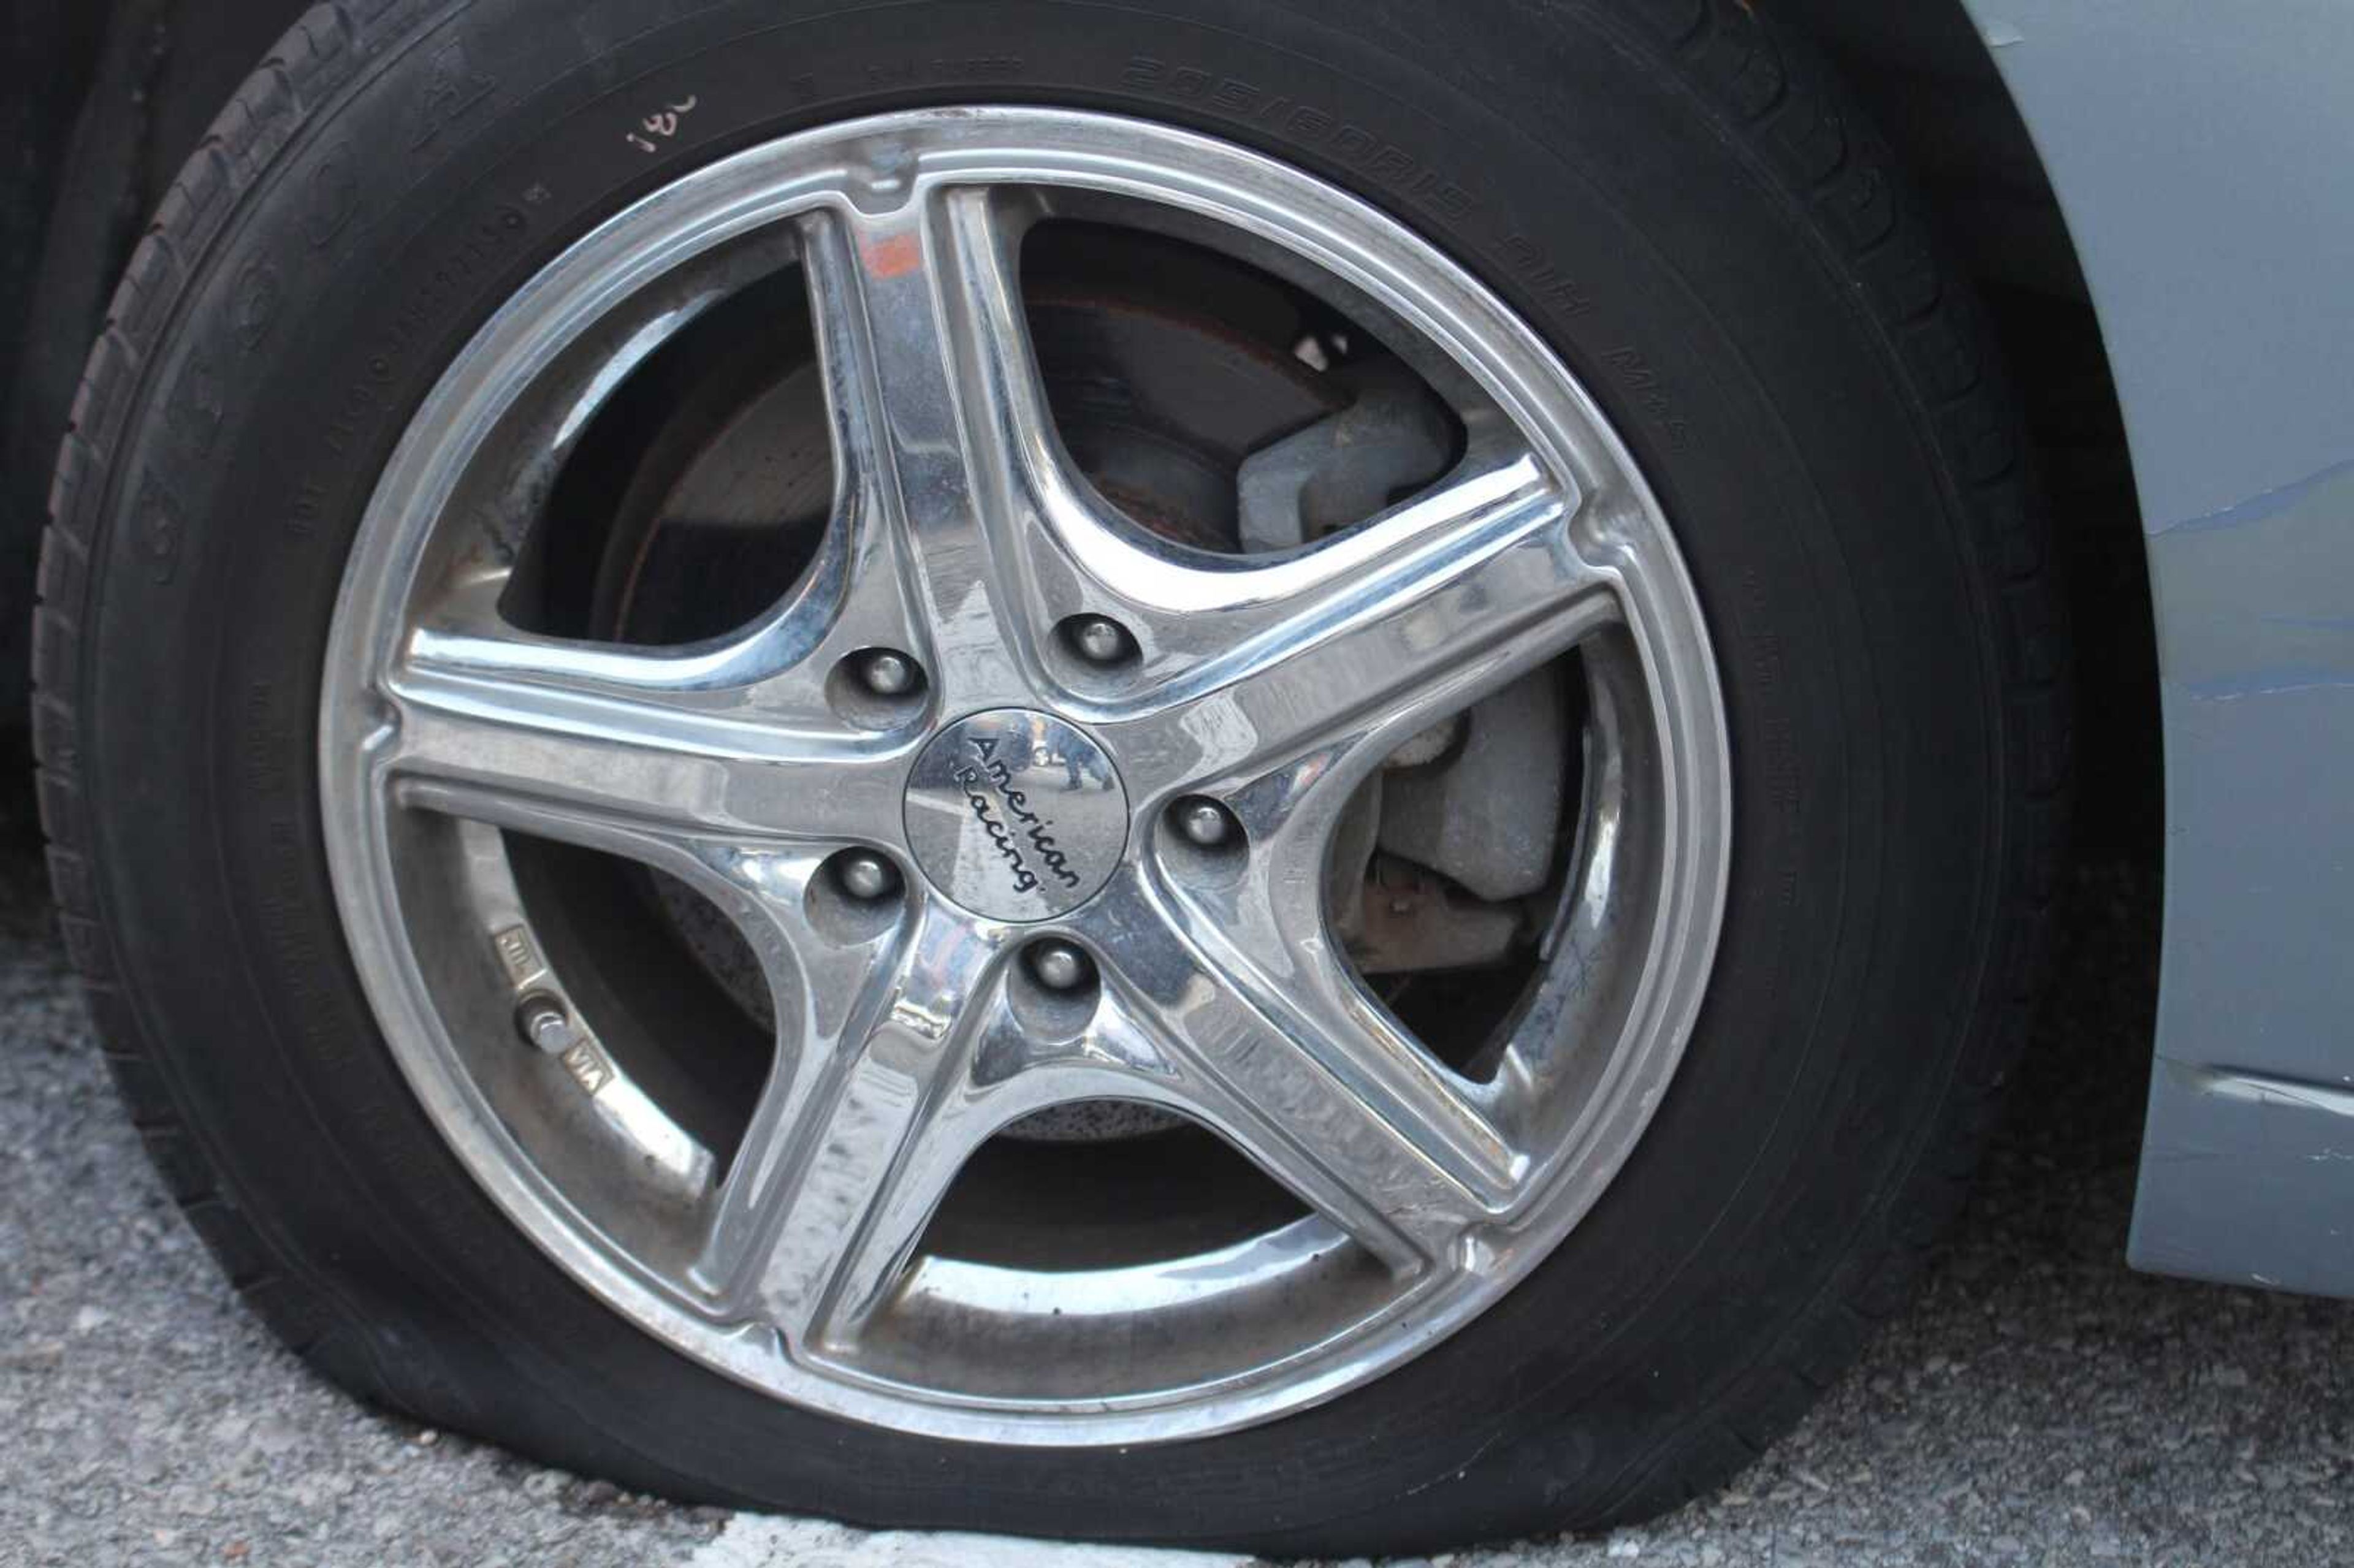 This car was found sitting on its rim after vandals punctured the tires and damaged paint to this car and at least 16 others.